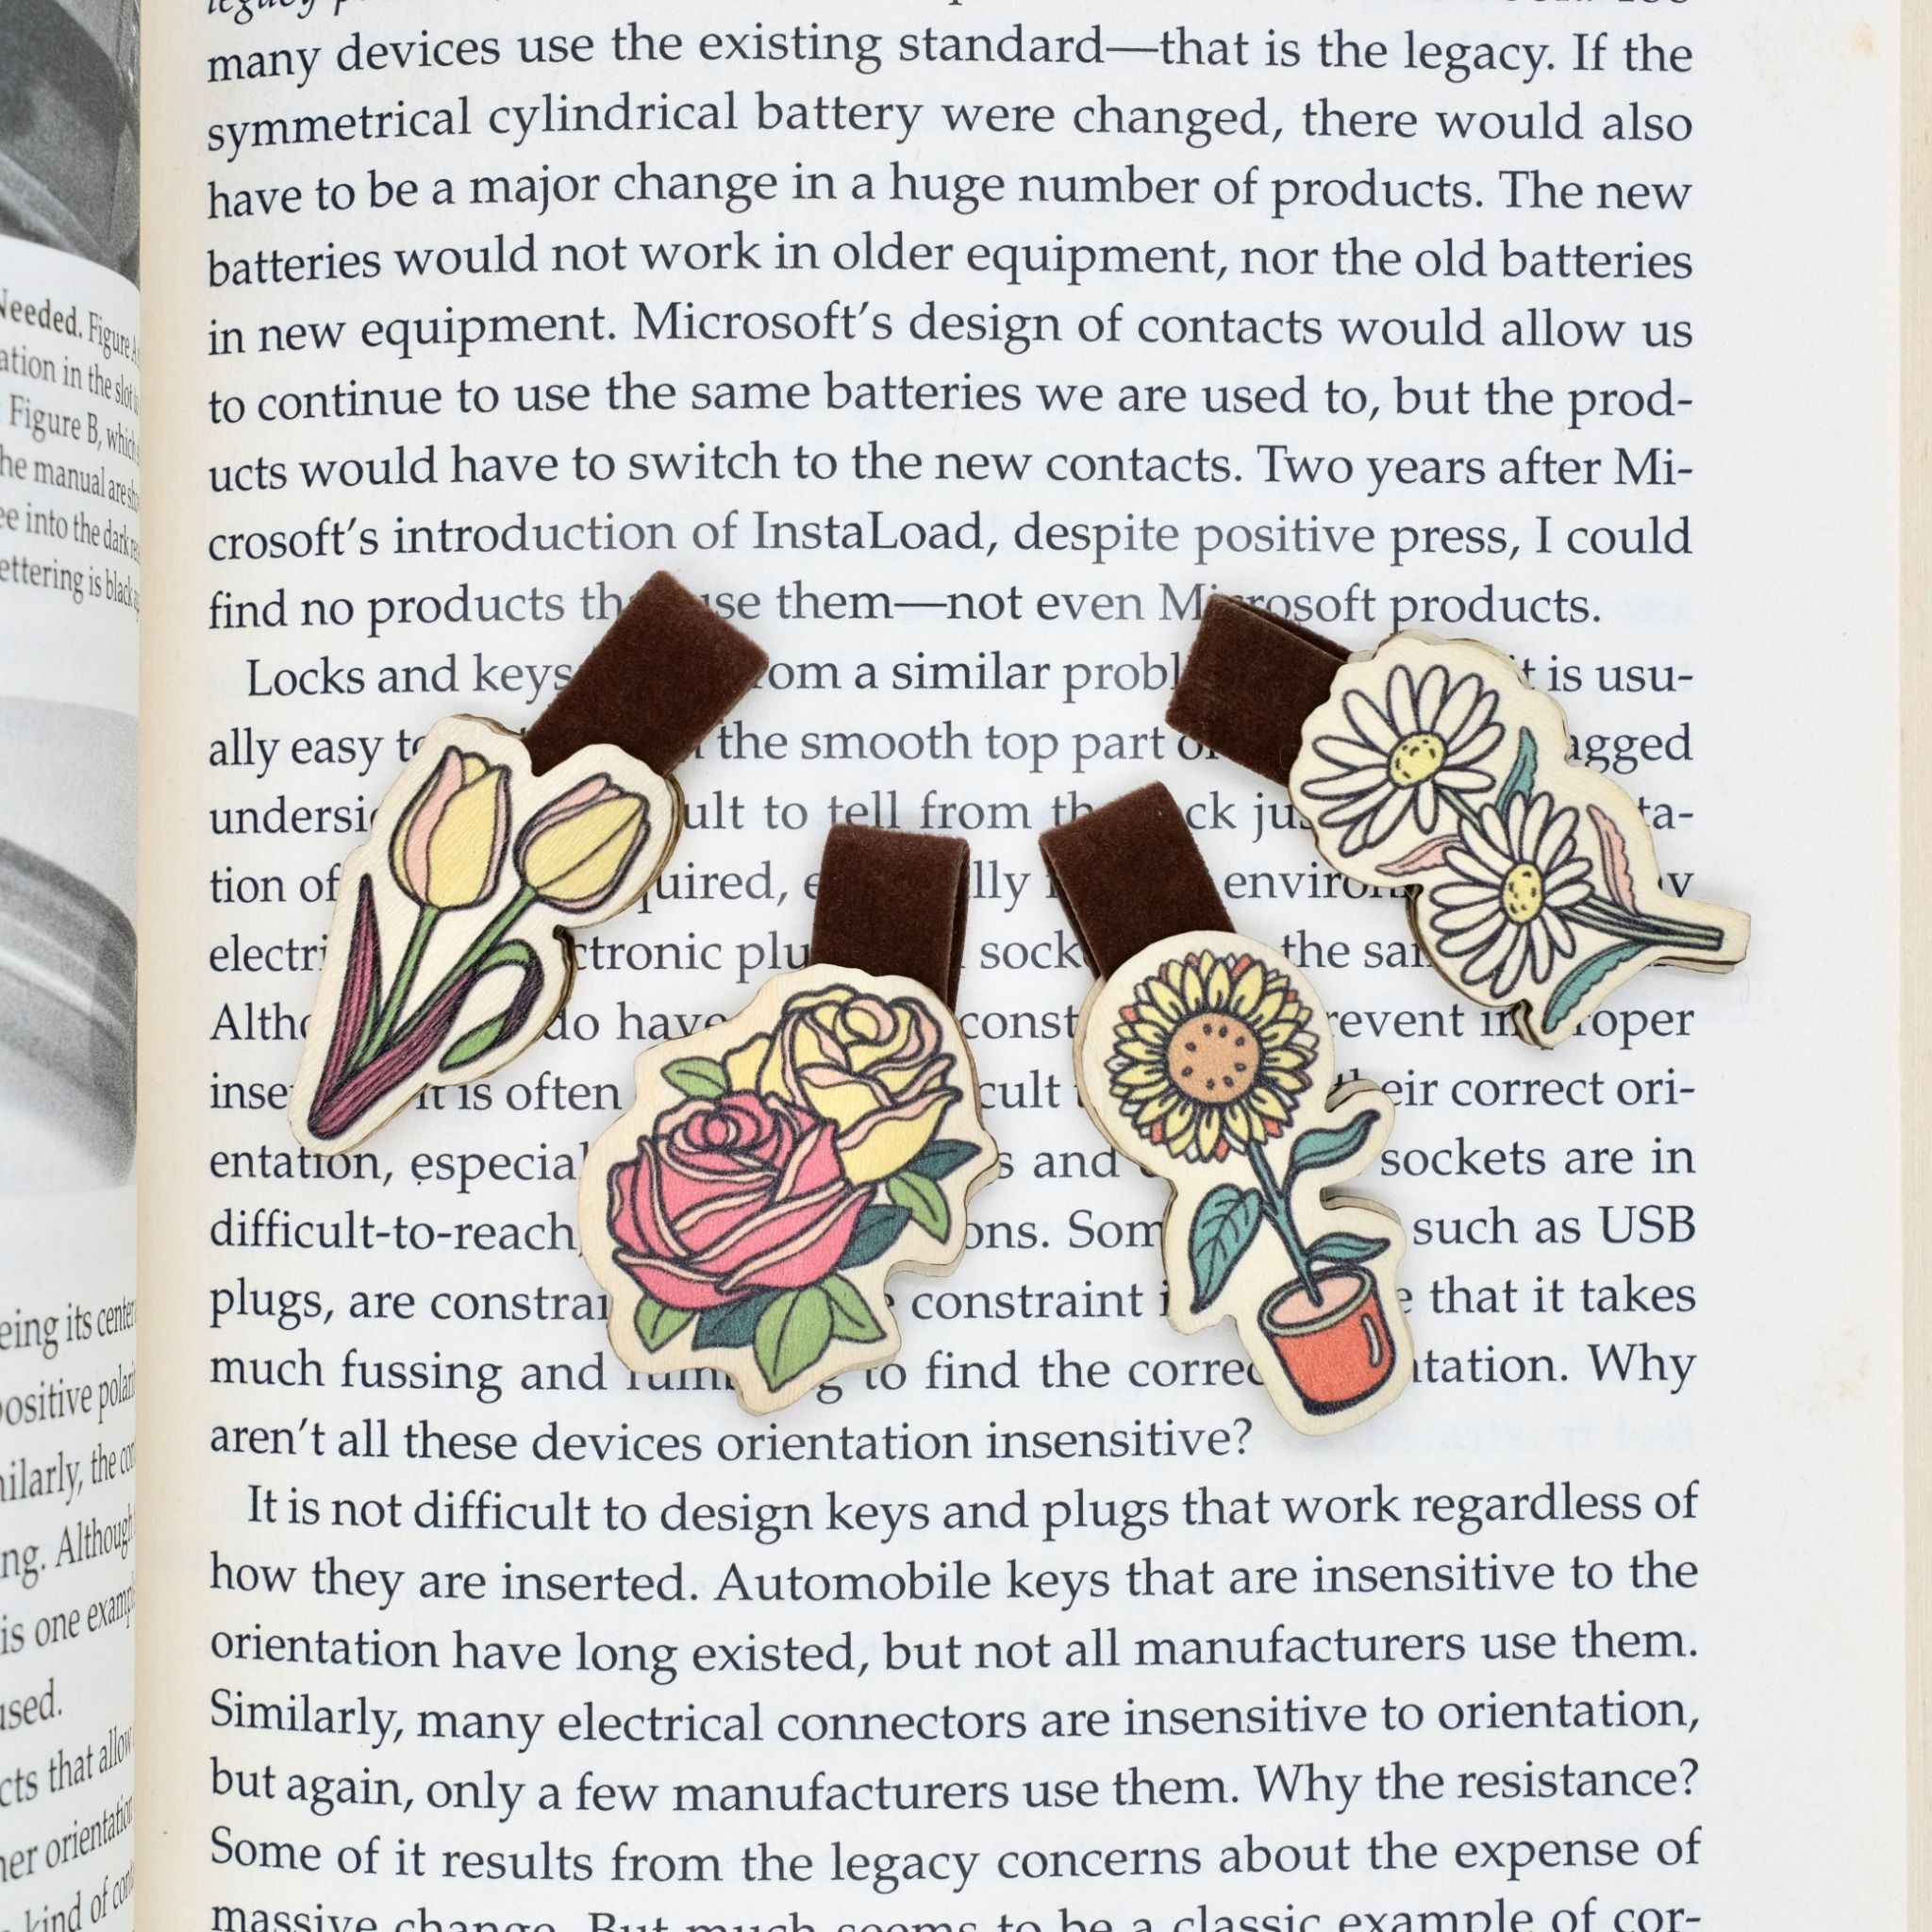  Wooden Bookmark (Set 4) - Plants & Insects 